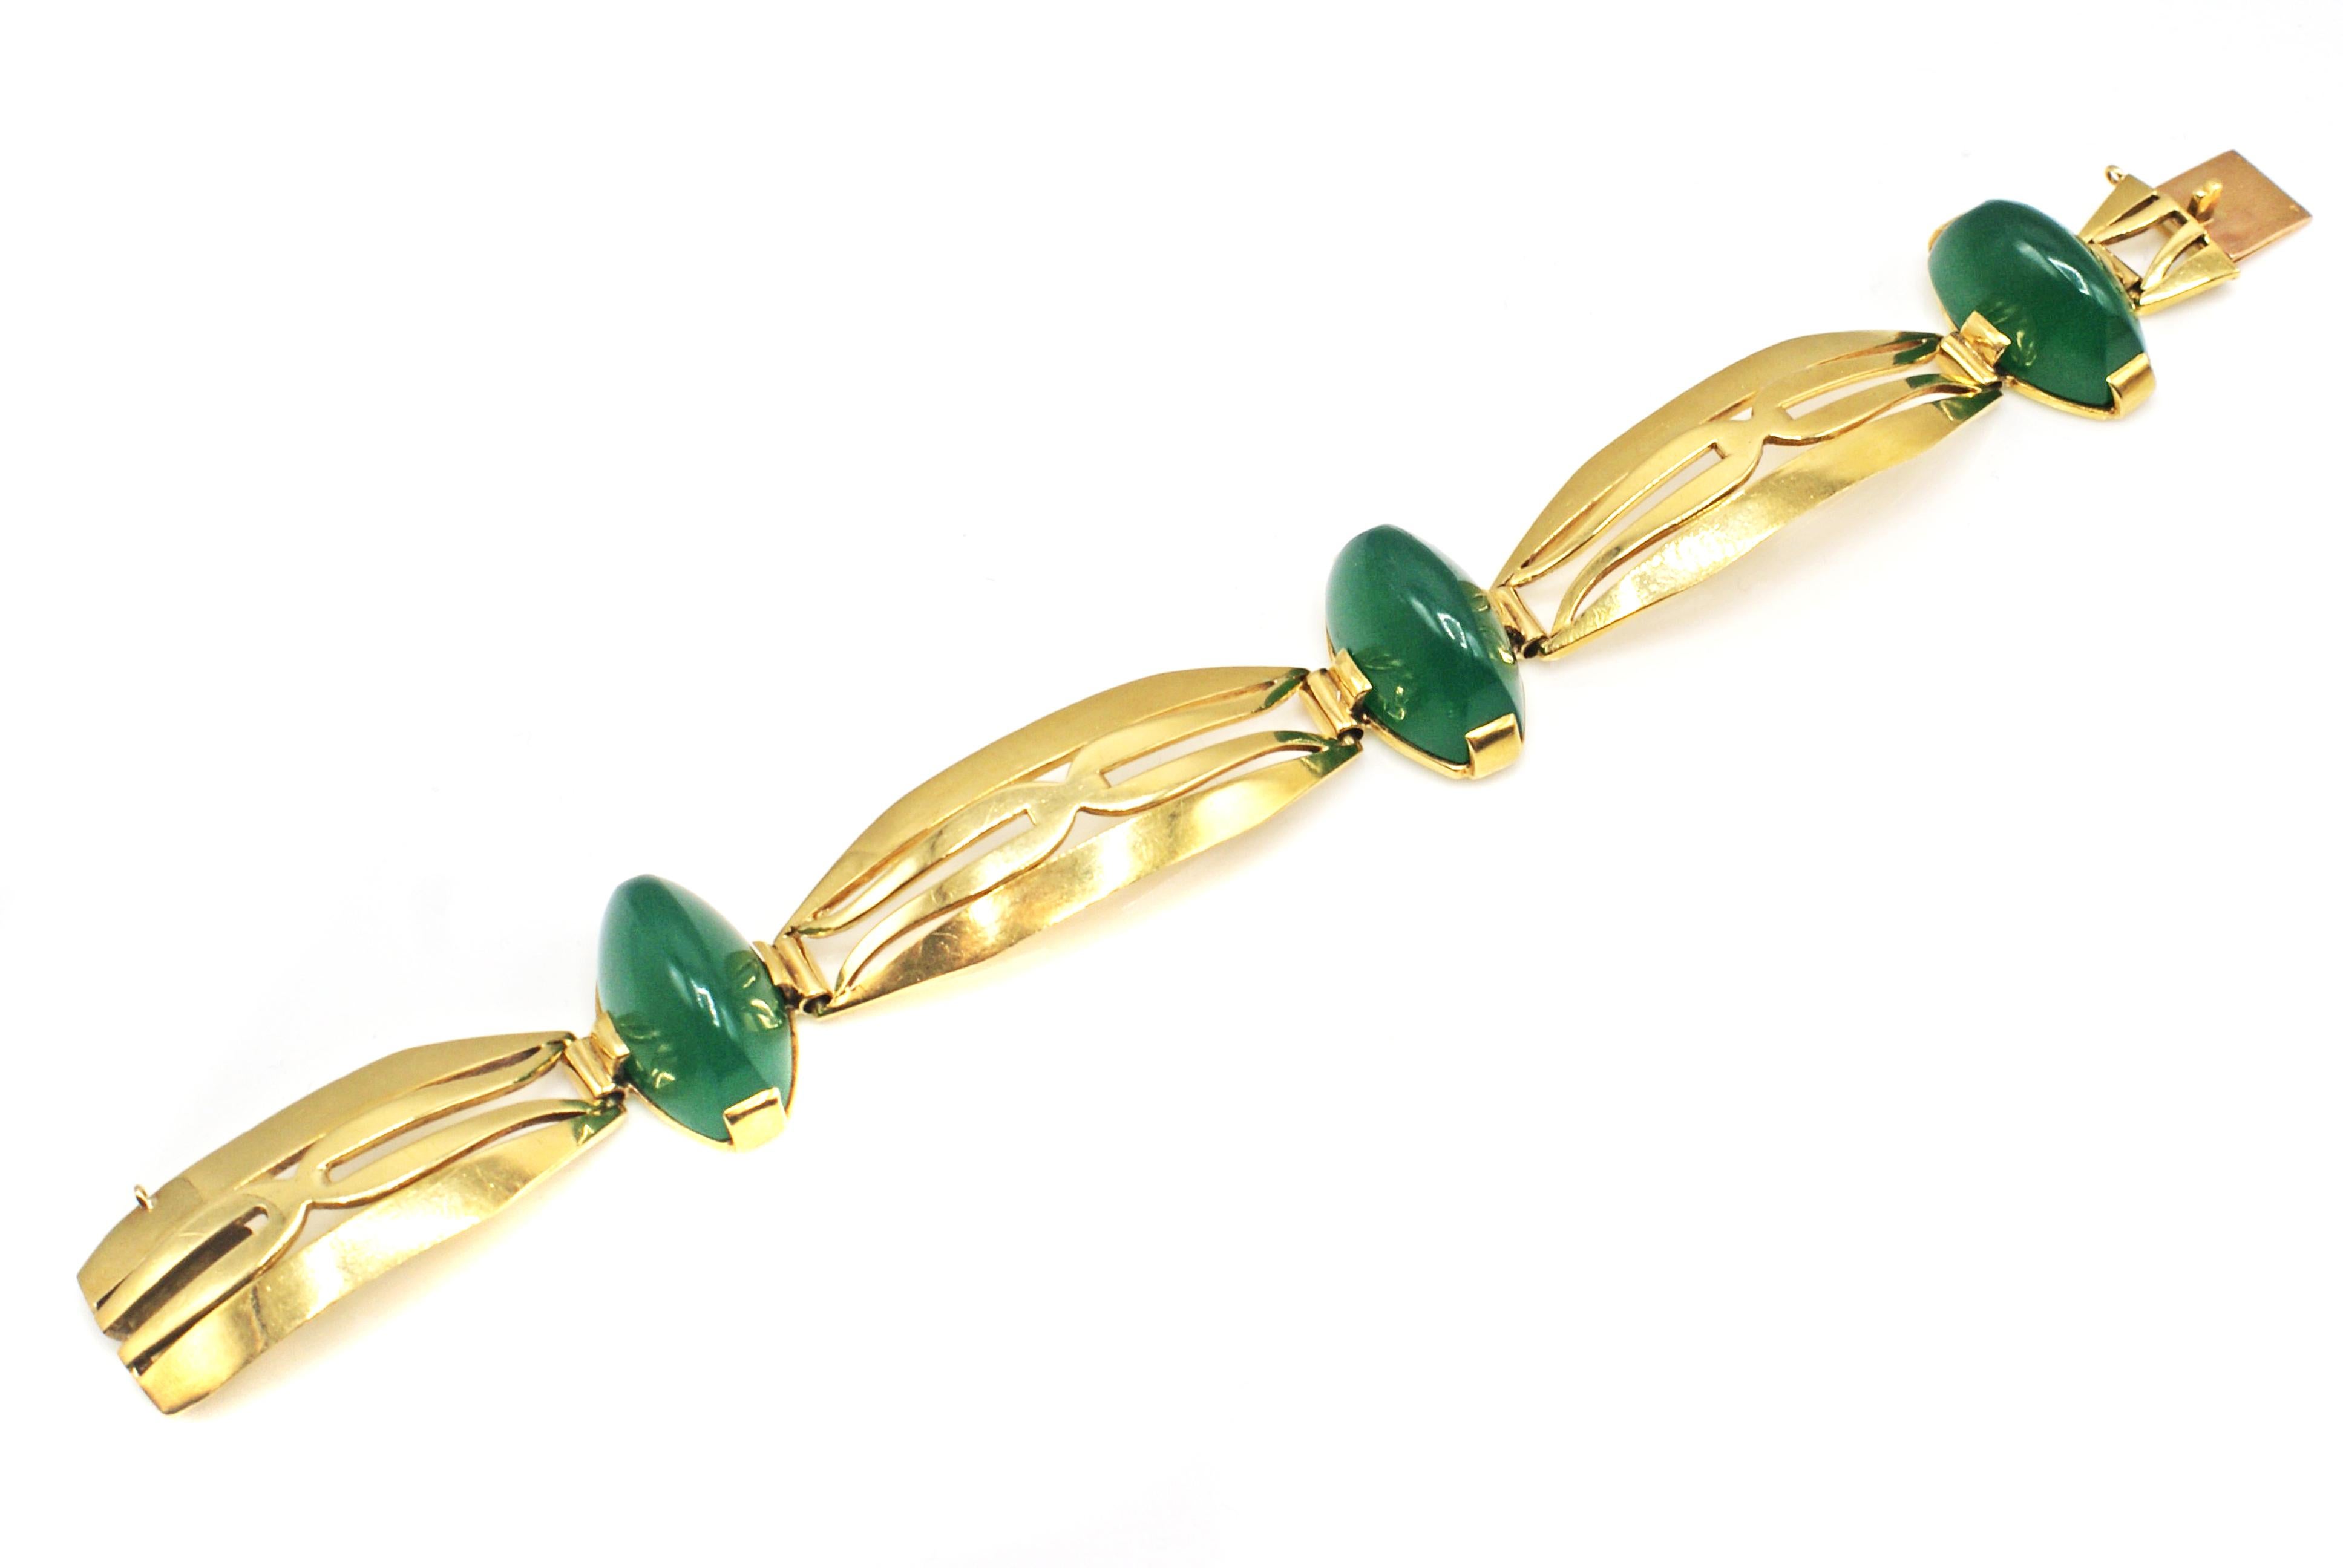 This beautifully designed and masterfully handcrafted French bracelet from the 1930s displays the geometrical design indicative of this era. Three elongated oval shaped panels of 18 karat gold are flexibly connected to three oval shaped mounts, each